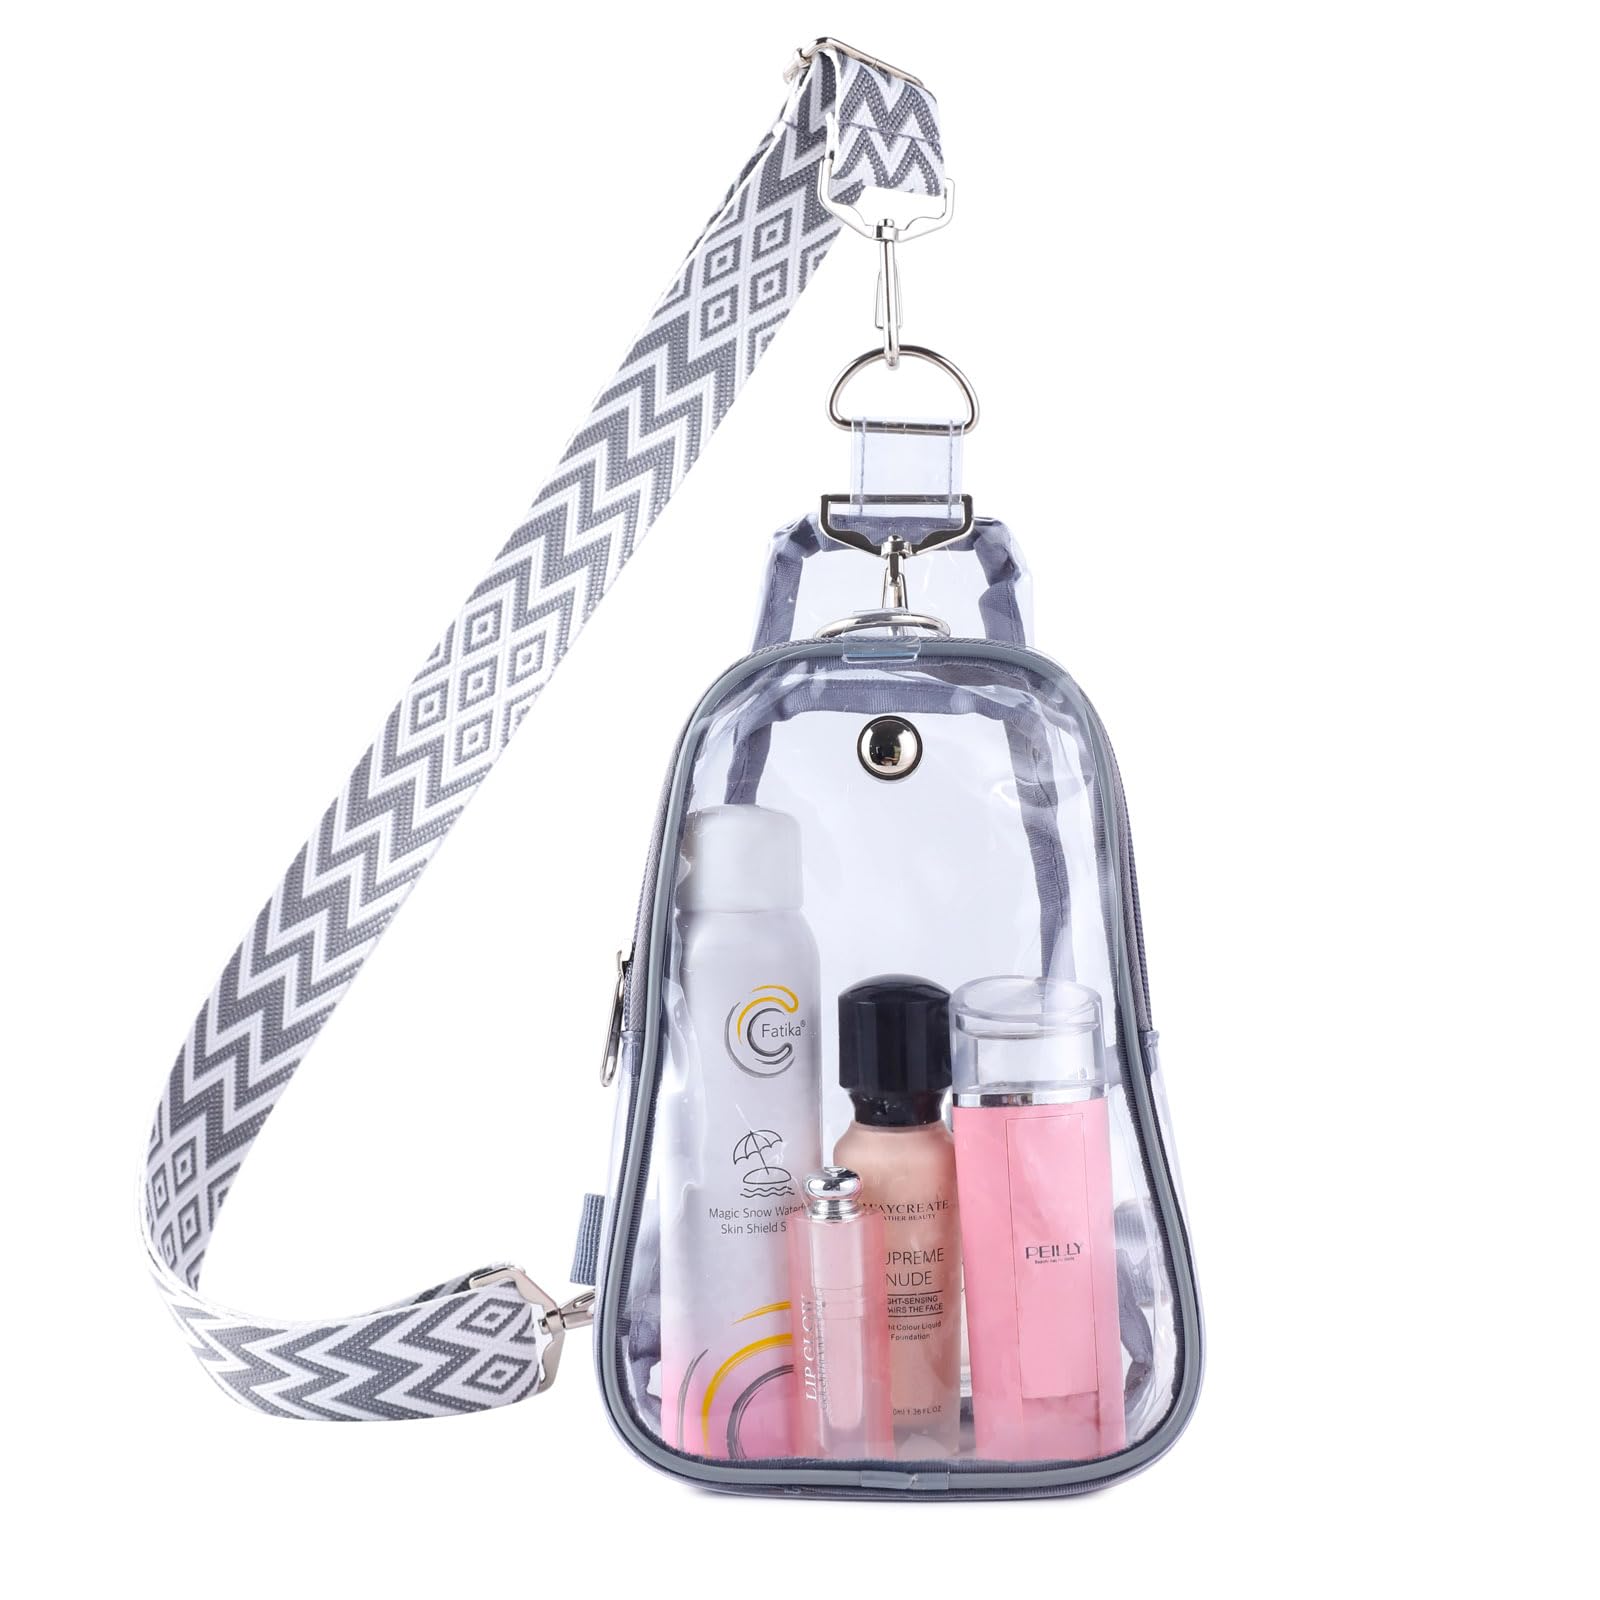 Clear Bag Stadium Approved, Clear Sling Bag with Embroidered Strap, Clear Crossbody Fanny Pack for Concerts Festivals Sports Events-Grey